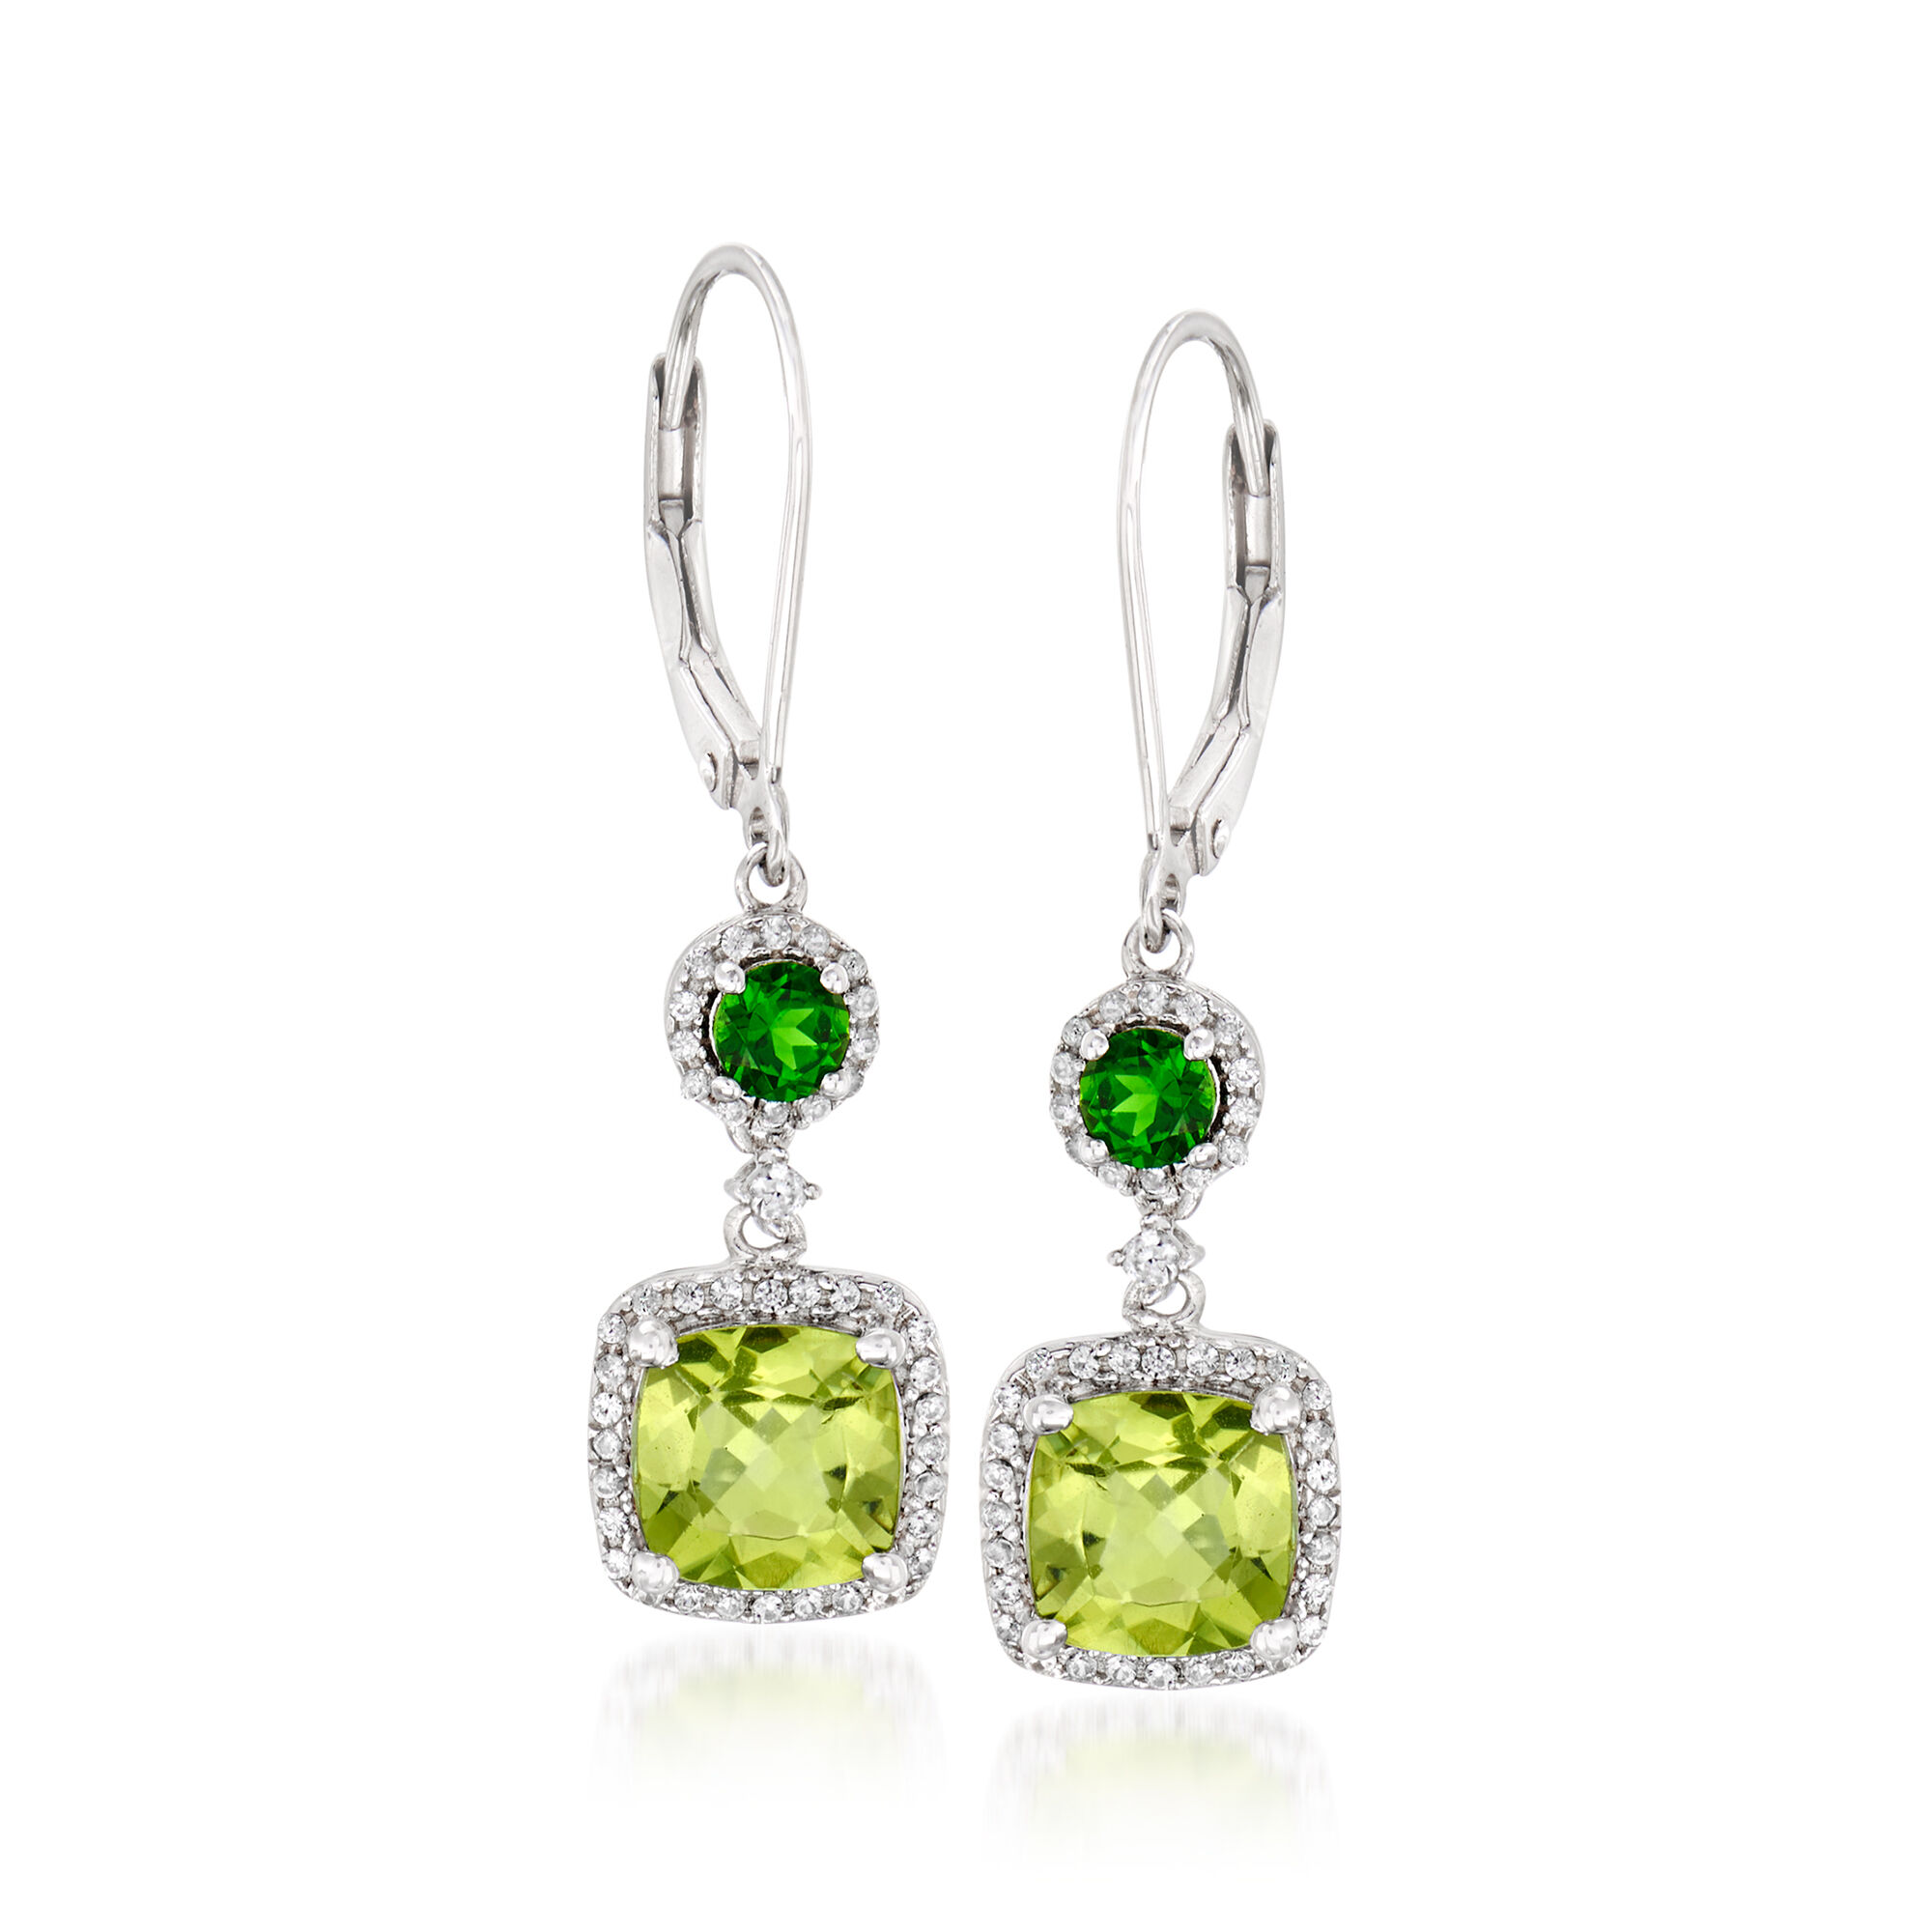 HANDCRAFTED 3.0-3.5MM  ROUND NATURAL EMERALD STUD  EARRINGS IN STERLING SILVER